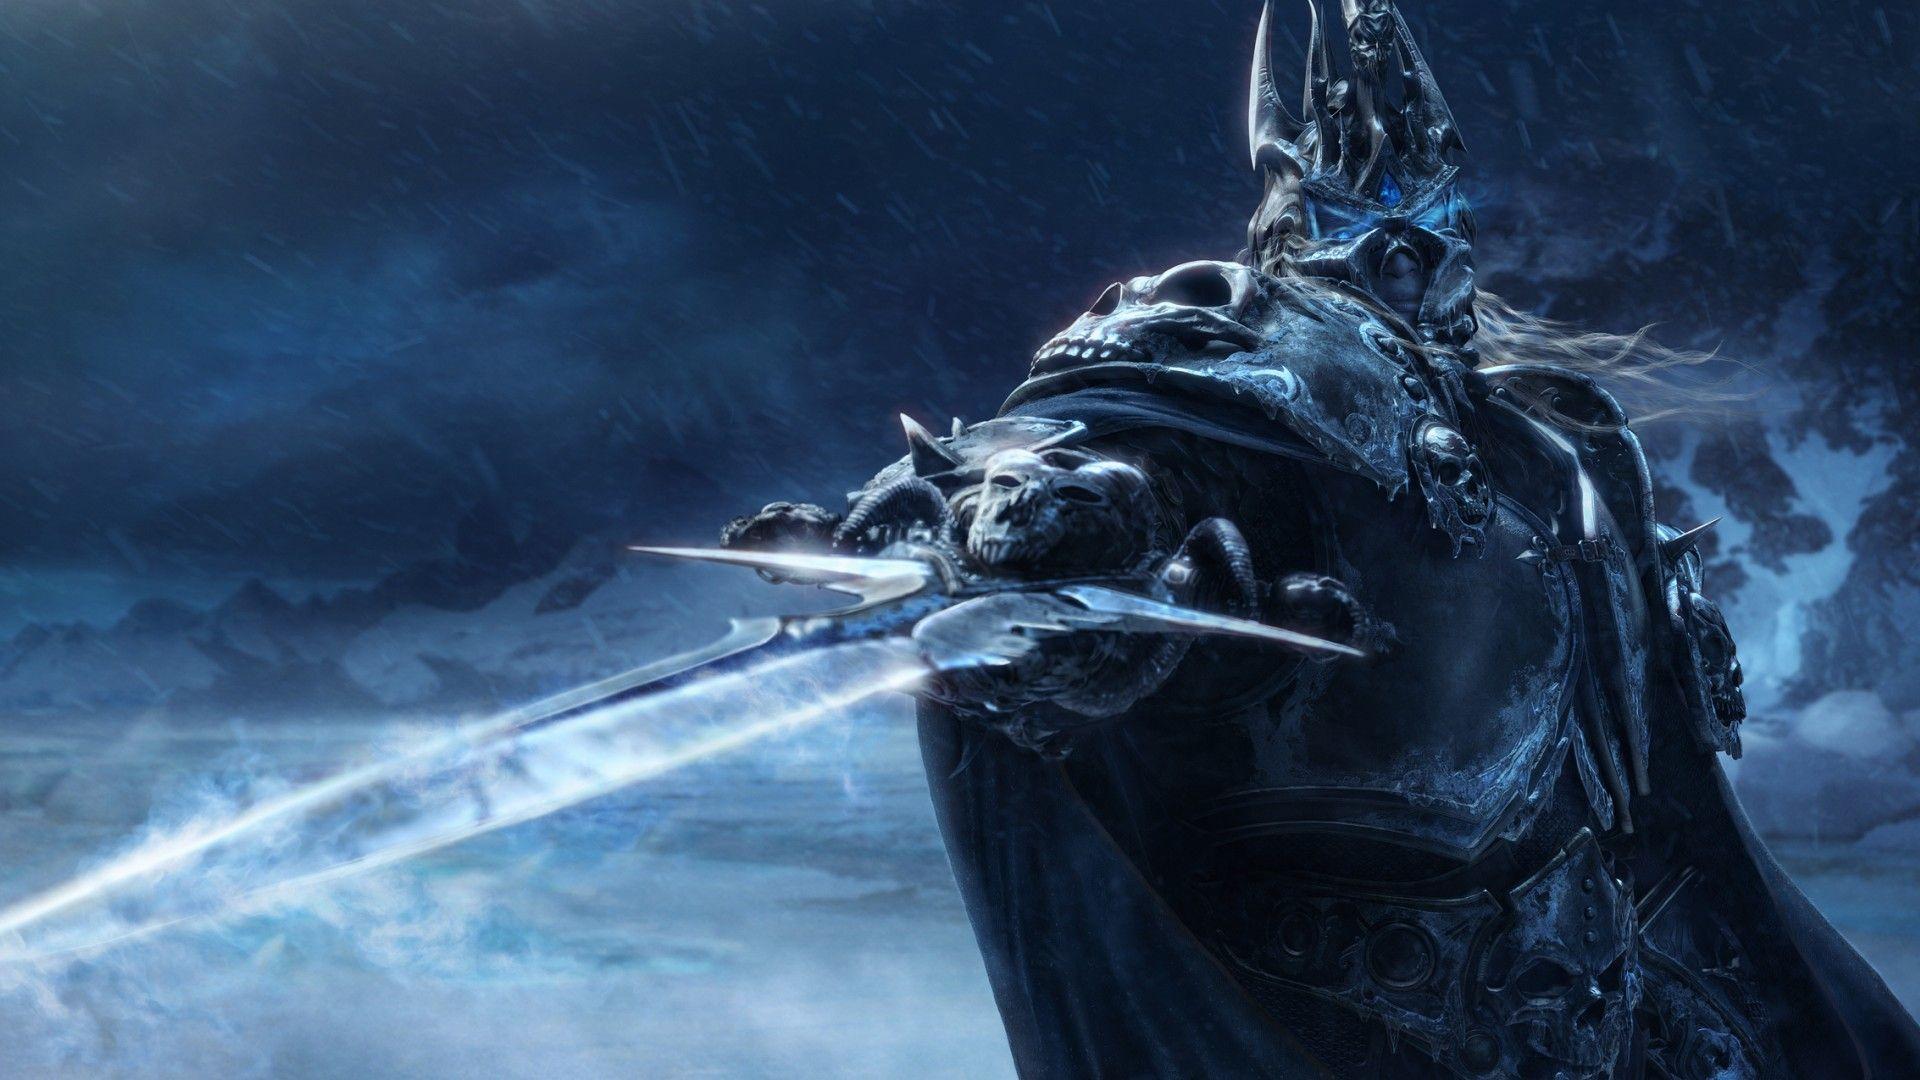 WoW Wrath of the Lich King launch